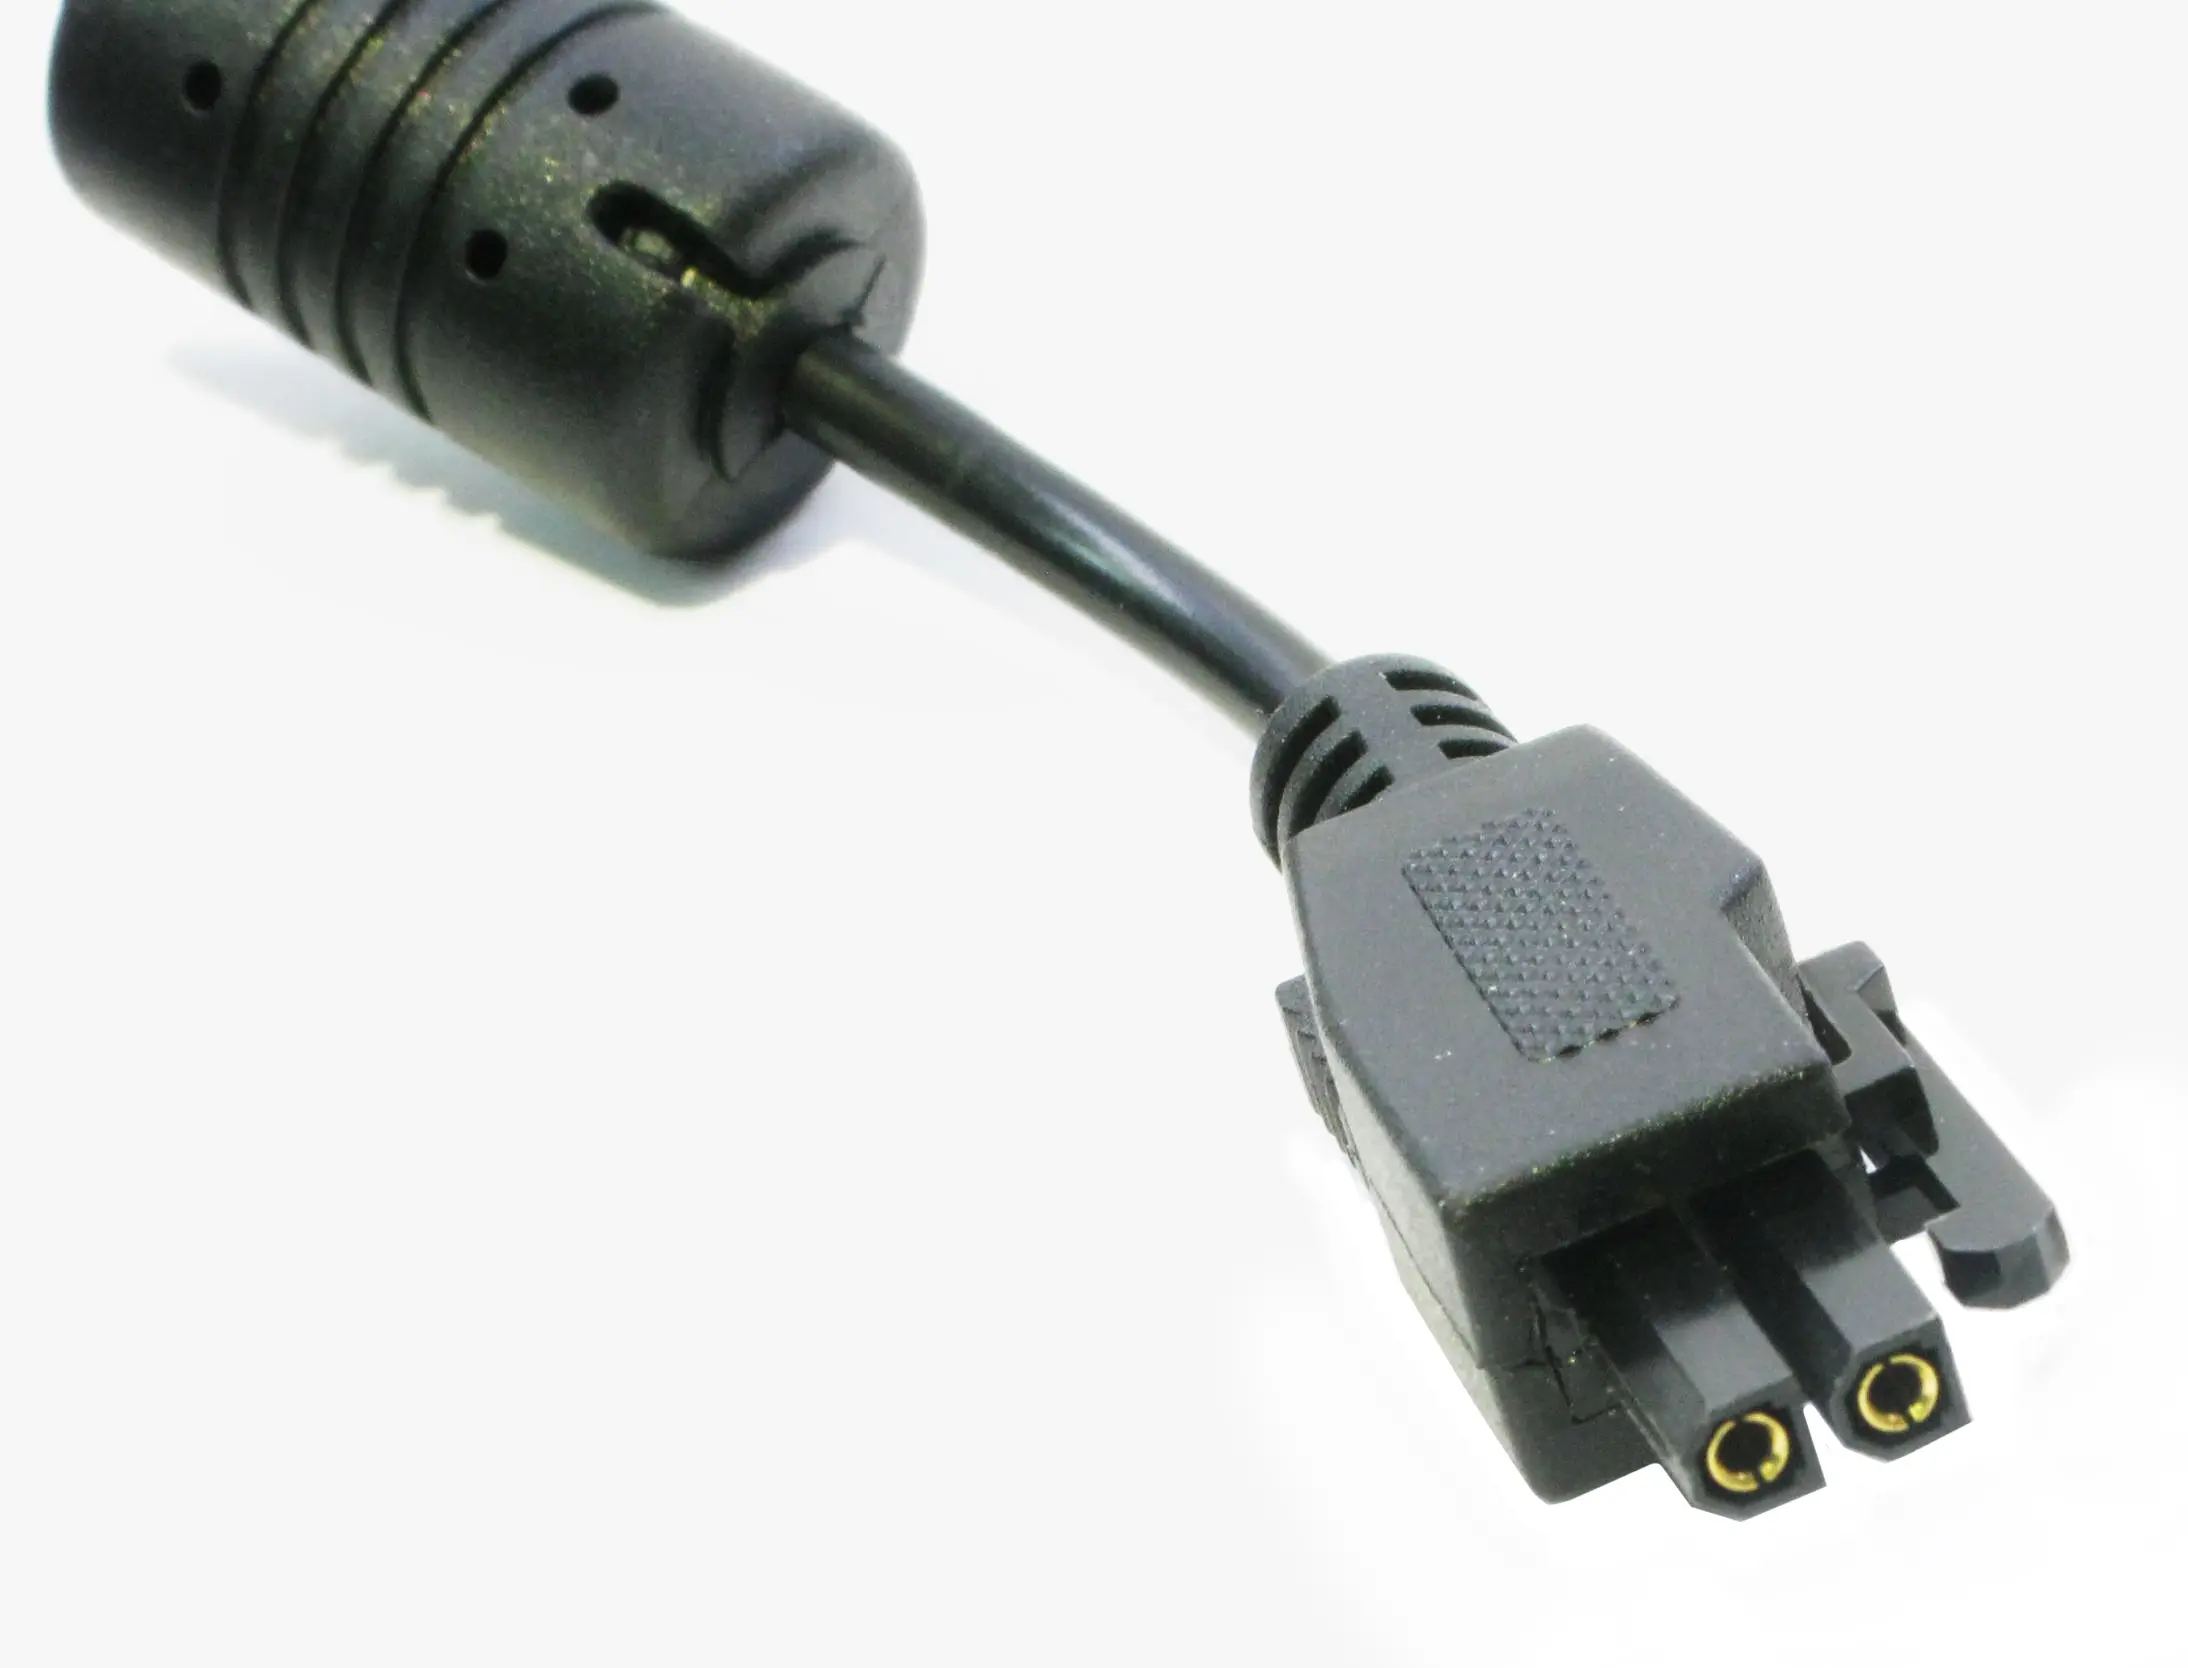 GlobTek offers over-molded versions of Molex Mini Fit Crimp Rectangular Housing, 2 Circuit, Black V-0, PN 39-03-9022 for various types of cables and applications, PN MFJ/C1176